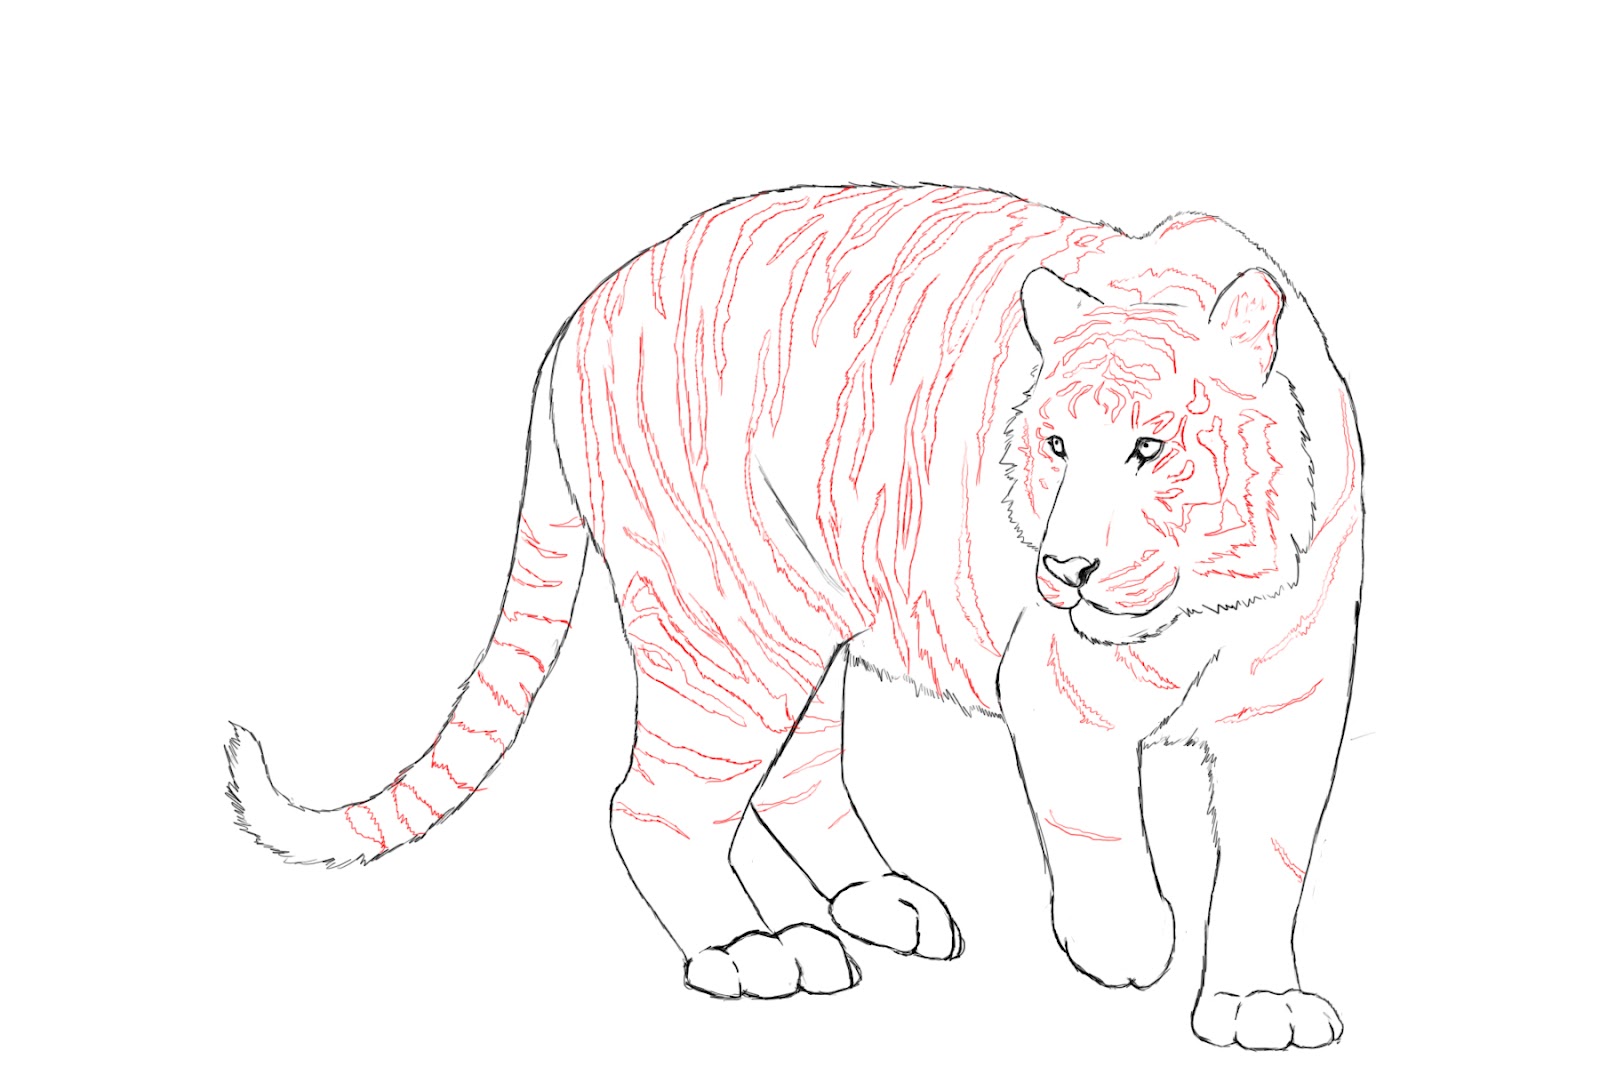 Draw in your tiger’s tail, and erase all the guidelines from the 